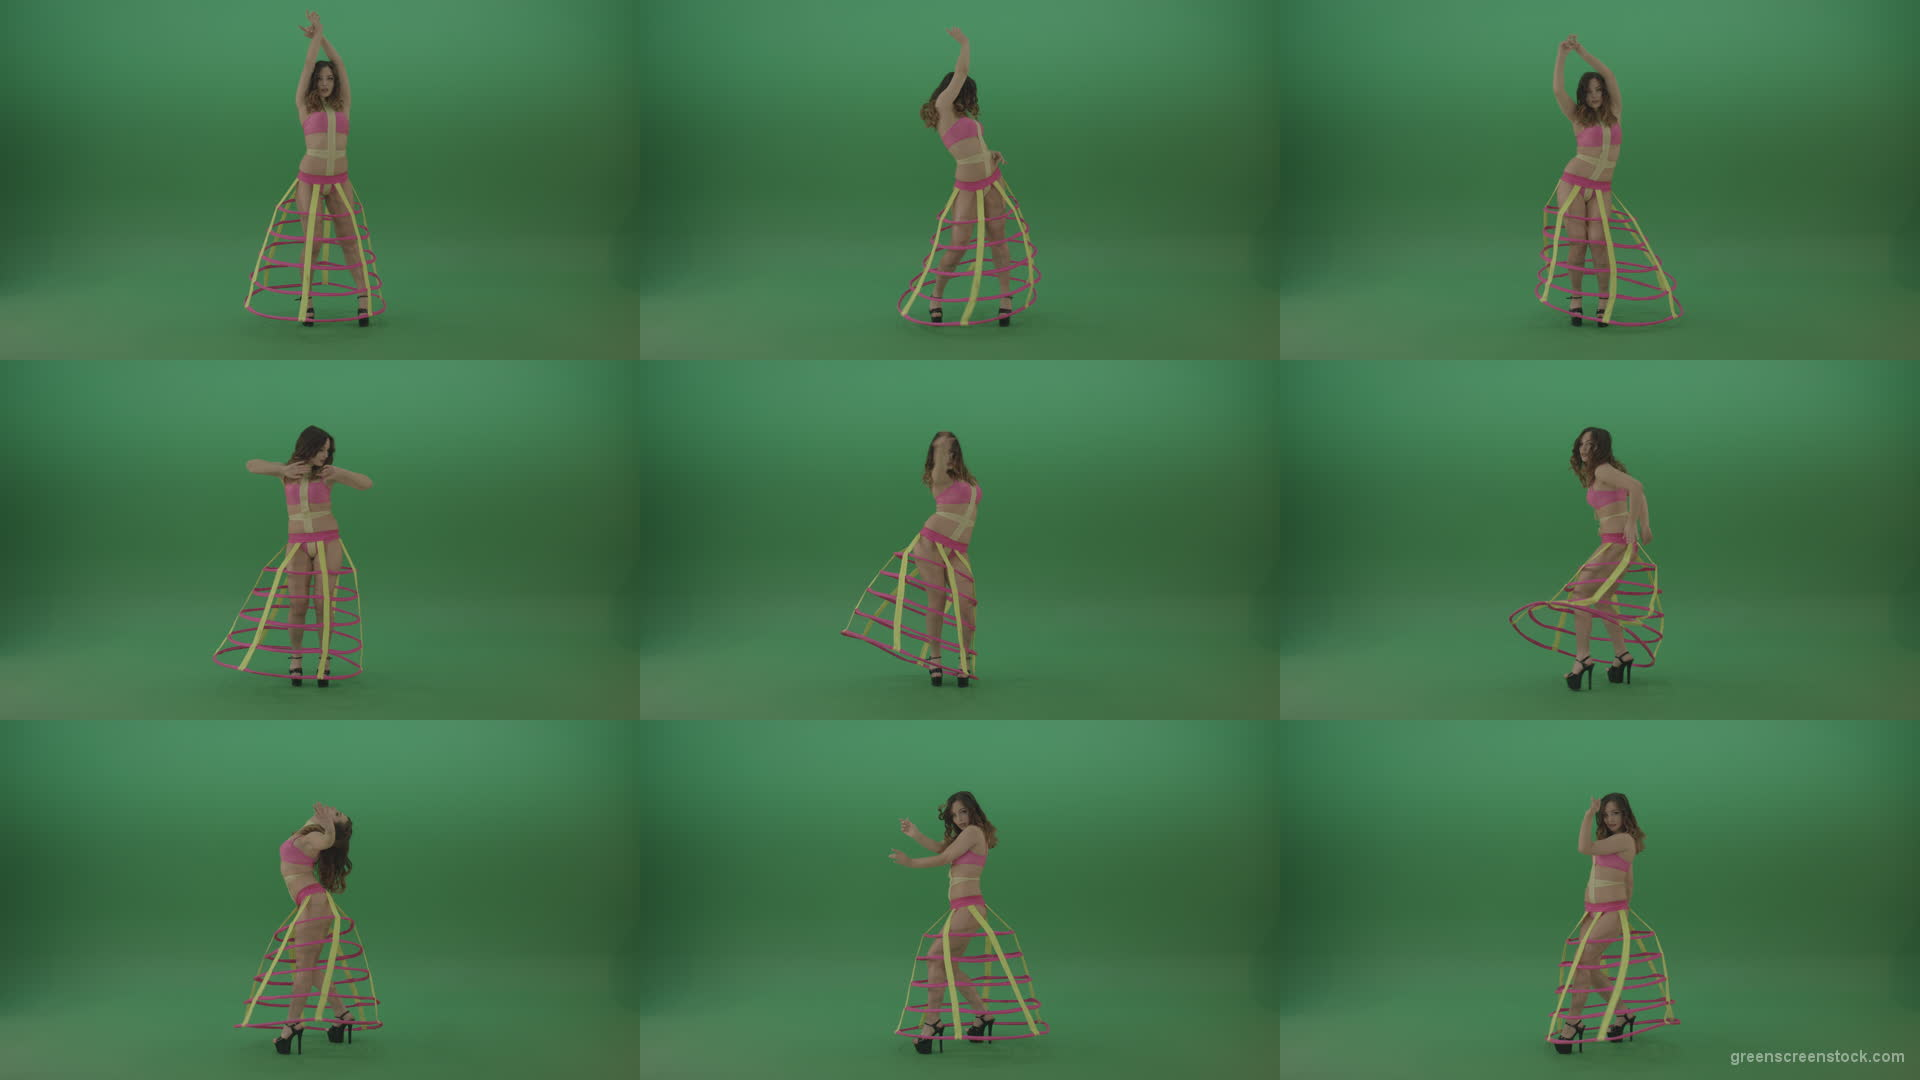 With-a-beautiful-appearance-brunette-in-an-extraordinary-costume-dancing-on-green-screen Green Screen Stock